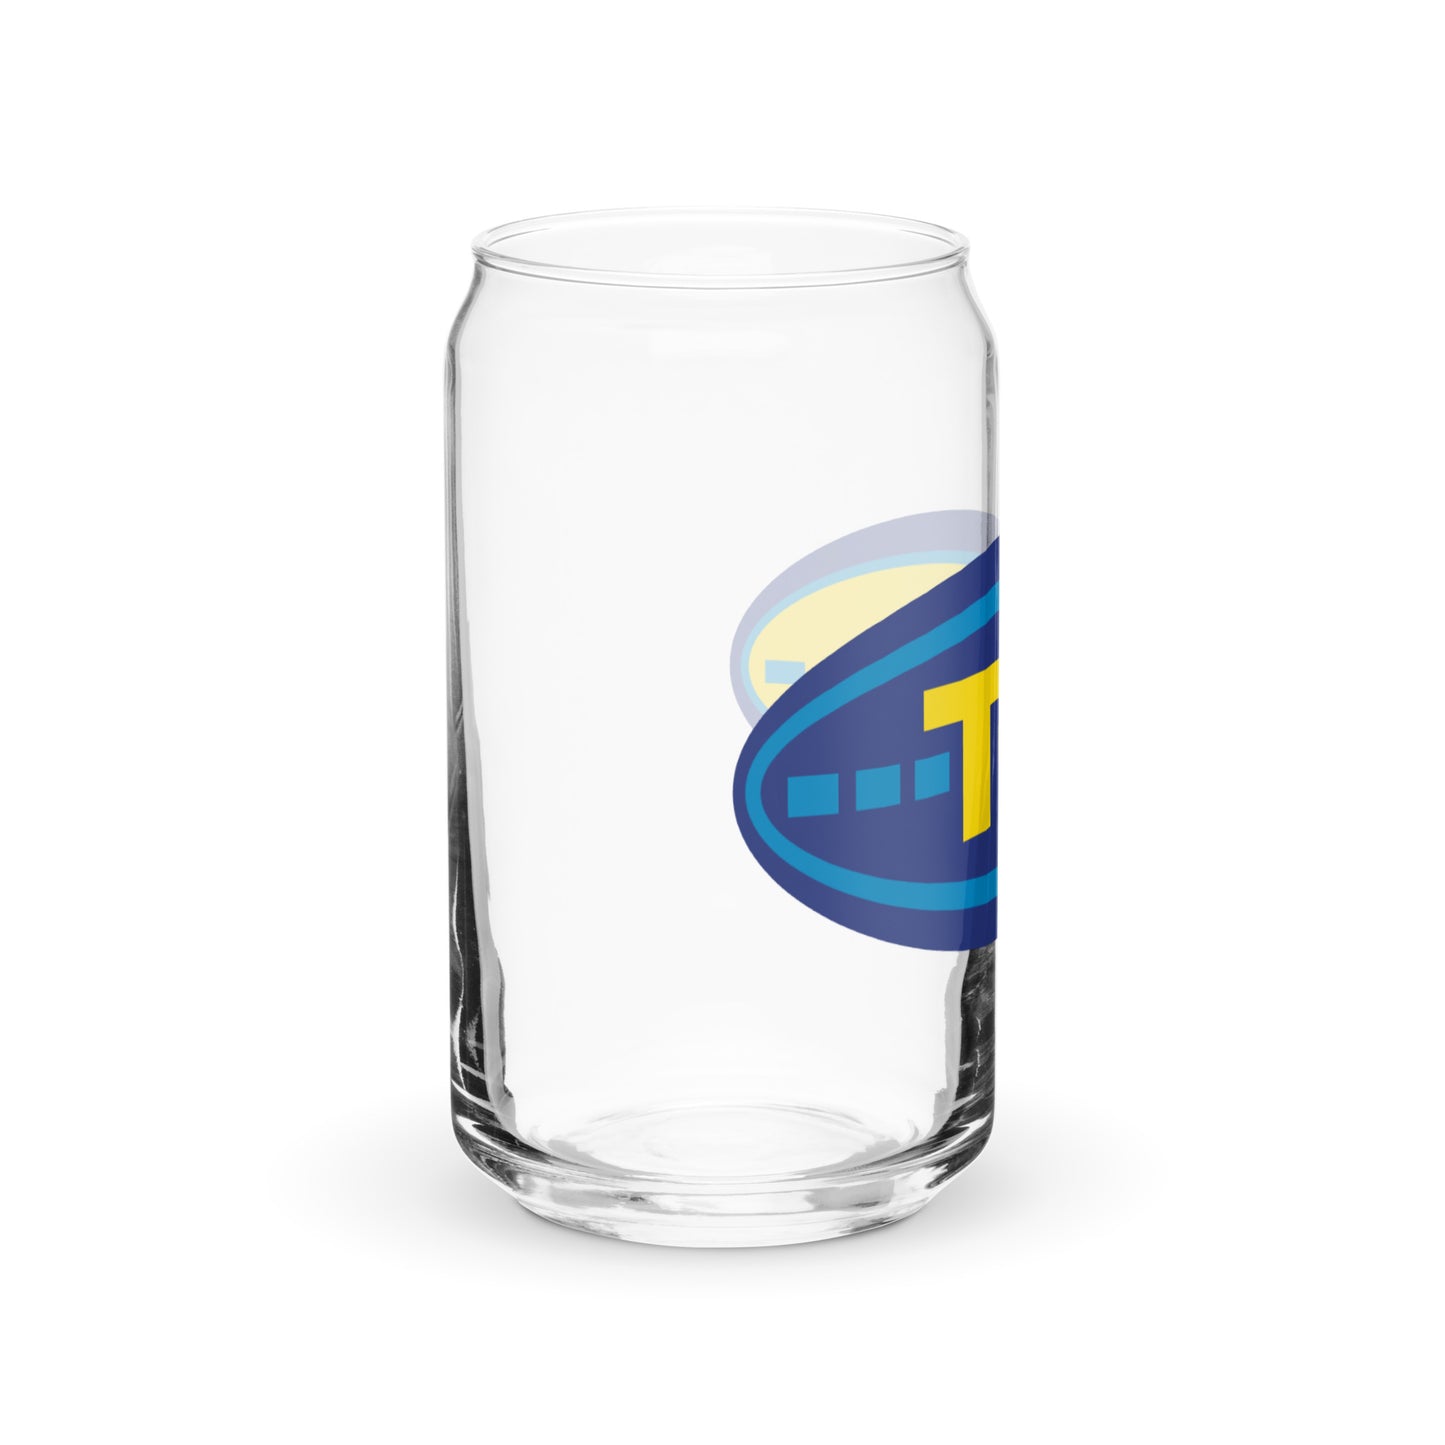 T-Jet Can-shaped glass